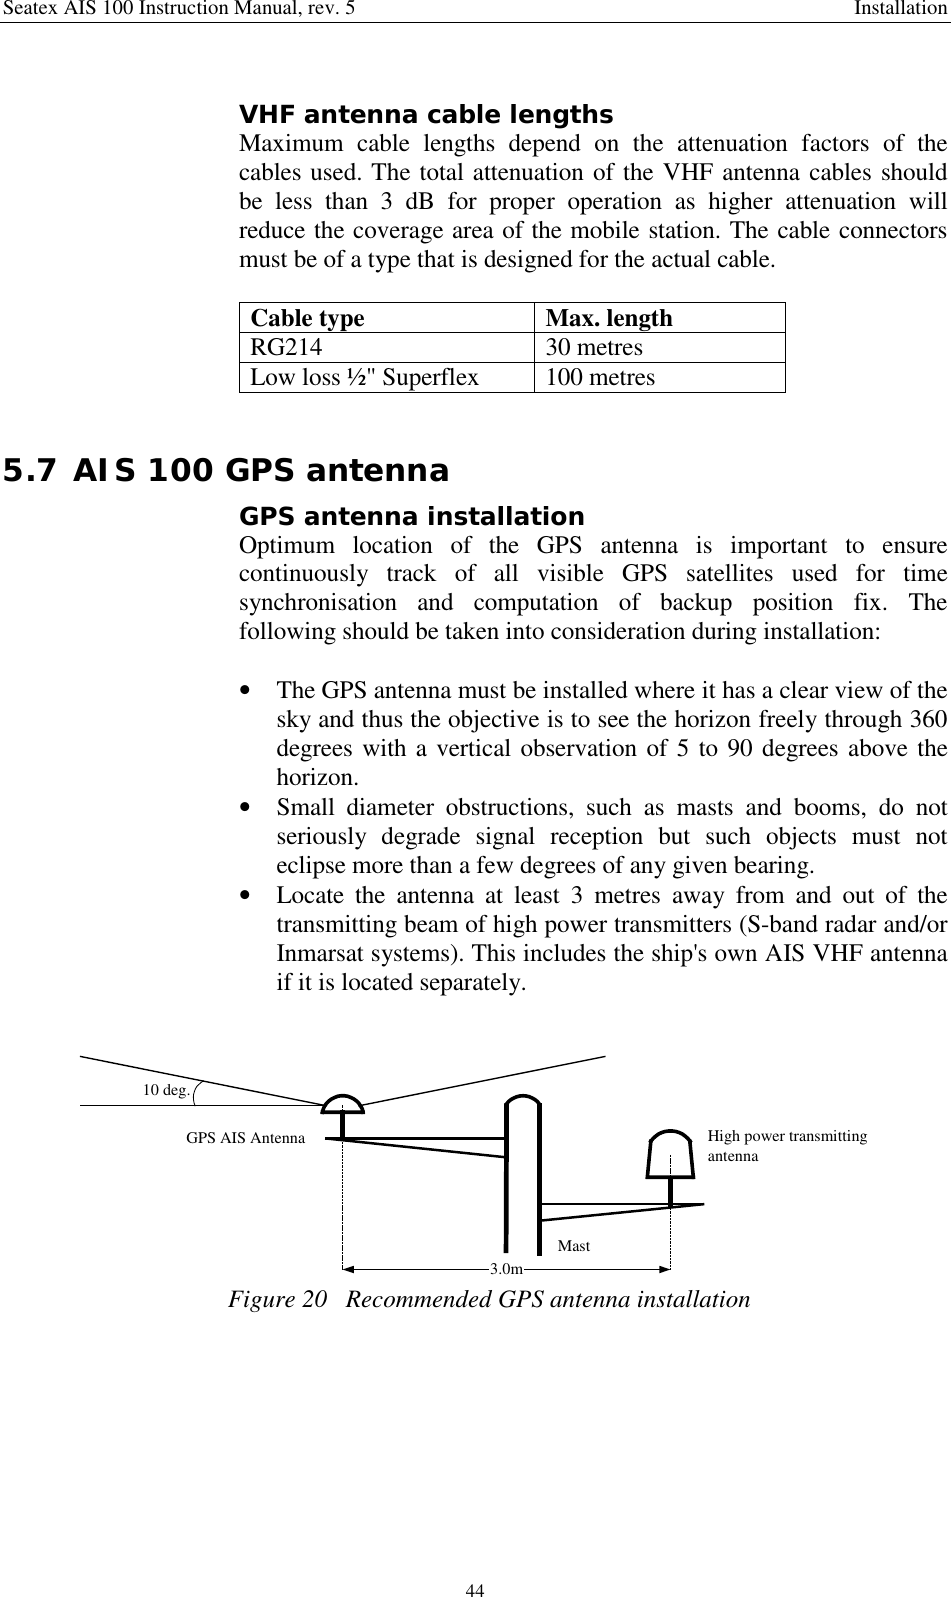 Seatex AIS 100 Instruction Manual, rev. 5 Installation44VHF antenna cable lengthsMaximum cable lengths depend on the attenuation factors of thecables used. The total attenuation of the VHF antenna cables shouldbe less than 3 dB for proper operation as higher attenuation willreduce the coverage area of the mobile station. The cable connectorsmust be of a type that is designed for the actual cable.Cable type Max. lengthRG214 30 metresLow loss ½&quot; Superflex 100 metres5.7 AIS 100 GPS antennaGPS antenna installationOptimum location of the GPS antenna is important to ensurecontinuously track of all visible GPS satellites used for timesynchronisation and computation of backup position fix. Thefollowing should be taken into consideration during installation:• The GPS antenna must be installed where it has a clear view of thesky and thus the objective is to see the horizon freely through 360degrees with a vertical observation of 5 to 90 degrees above thehorizon.• Small diameter obstructions, such as masts and booms, do notseriously degrade signal reception but such objects must noteclipse more than a few degrees of any given bearing.• Locate the antenna at least 3 metres away from and out of thetransmitting beam of high power transmitters (S-band radar and/orInmarsat systems). This includes the ship&apos;s own AIS VHF antennaif it is located separately.High power transmittingantenna3.0mGPS AIS Antenna10 deg.MastFigure 20   Recommended GPS antenna installation